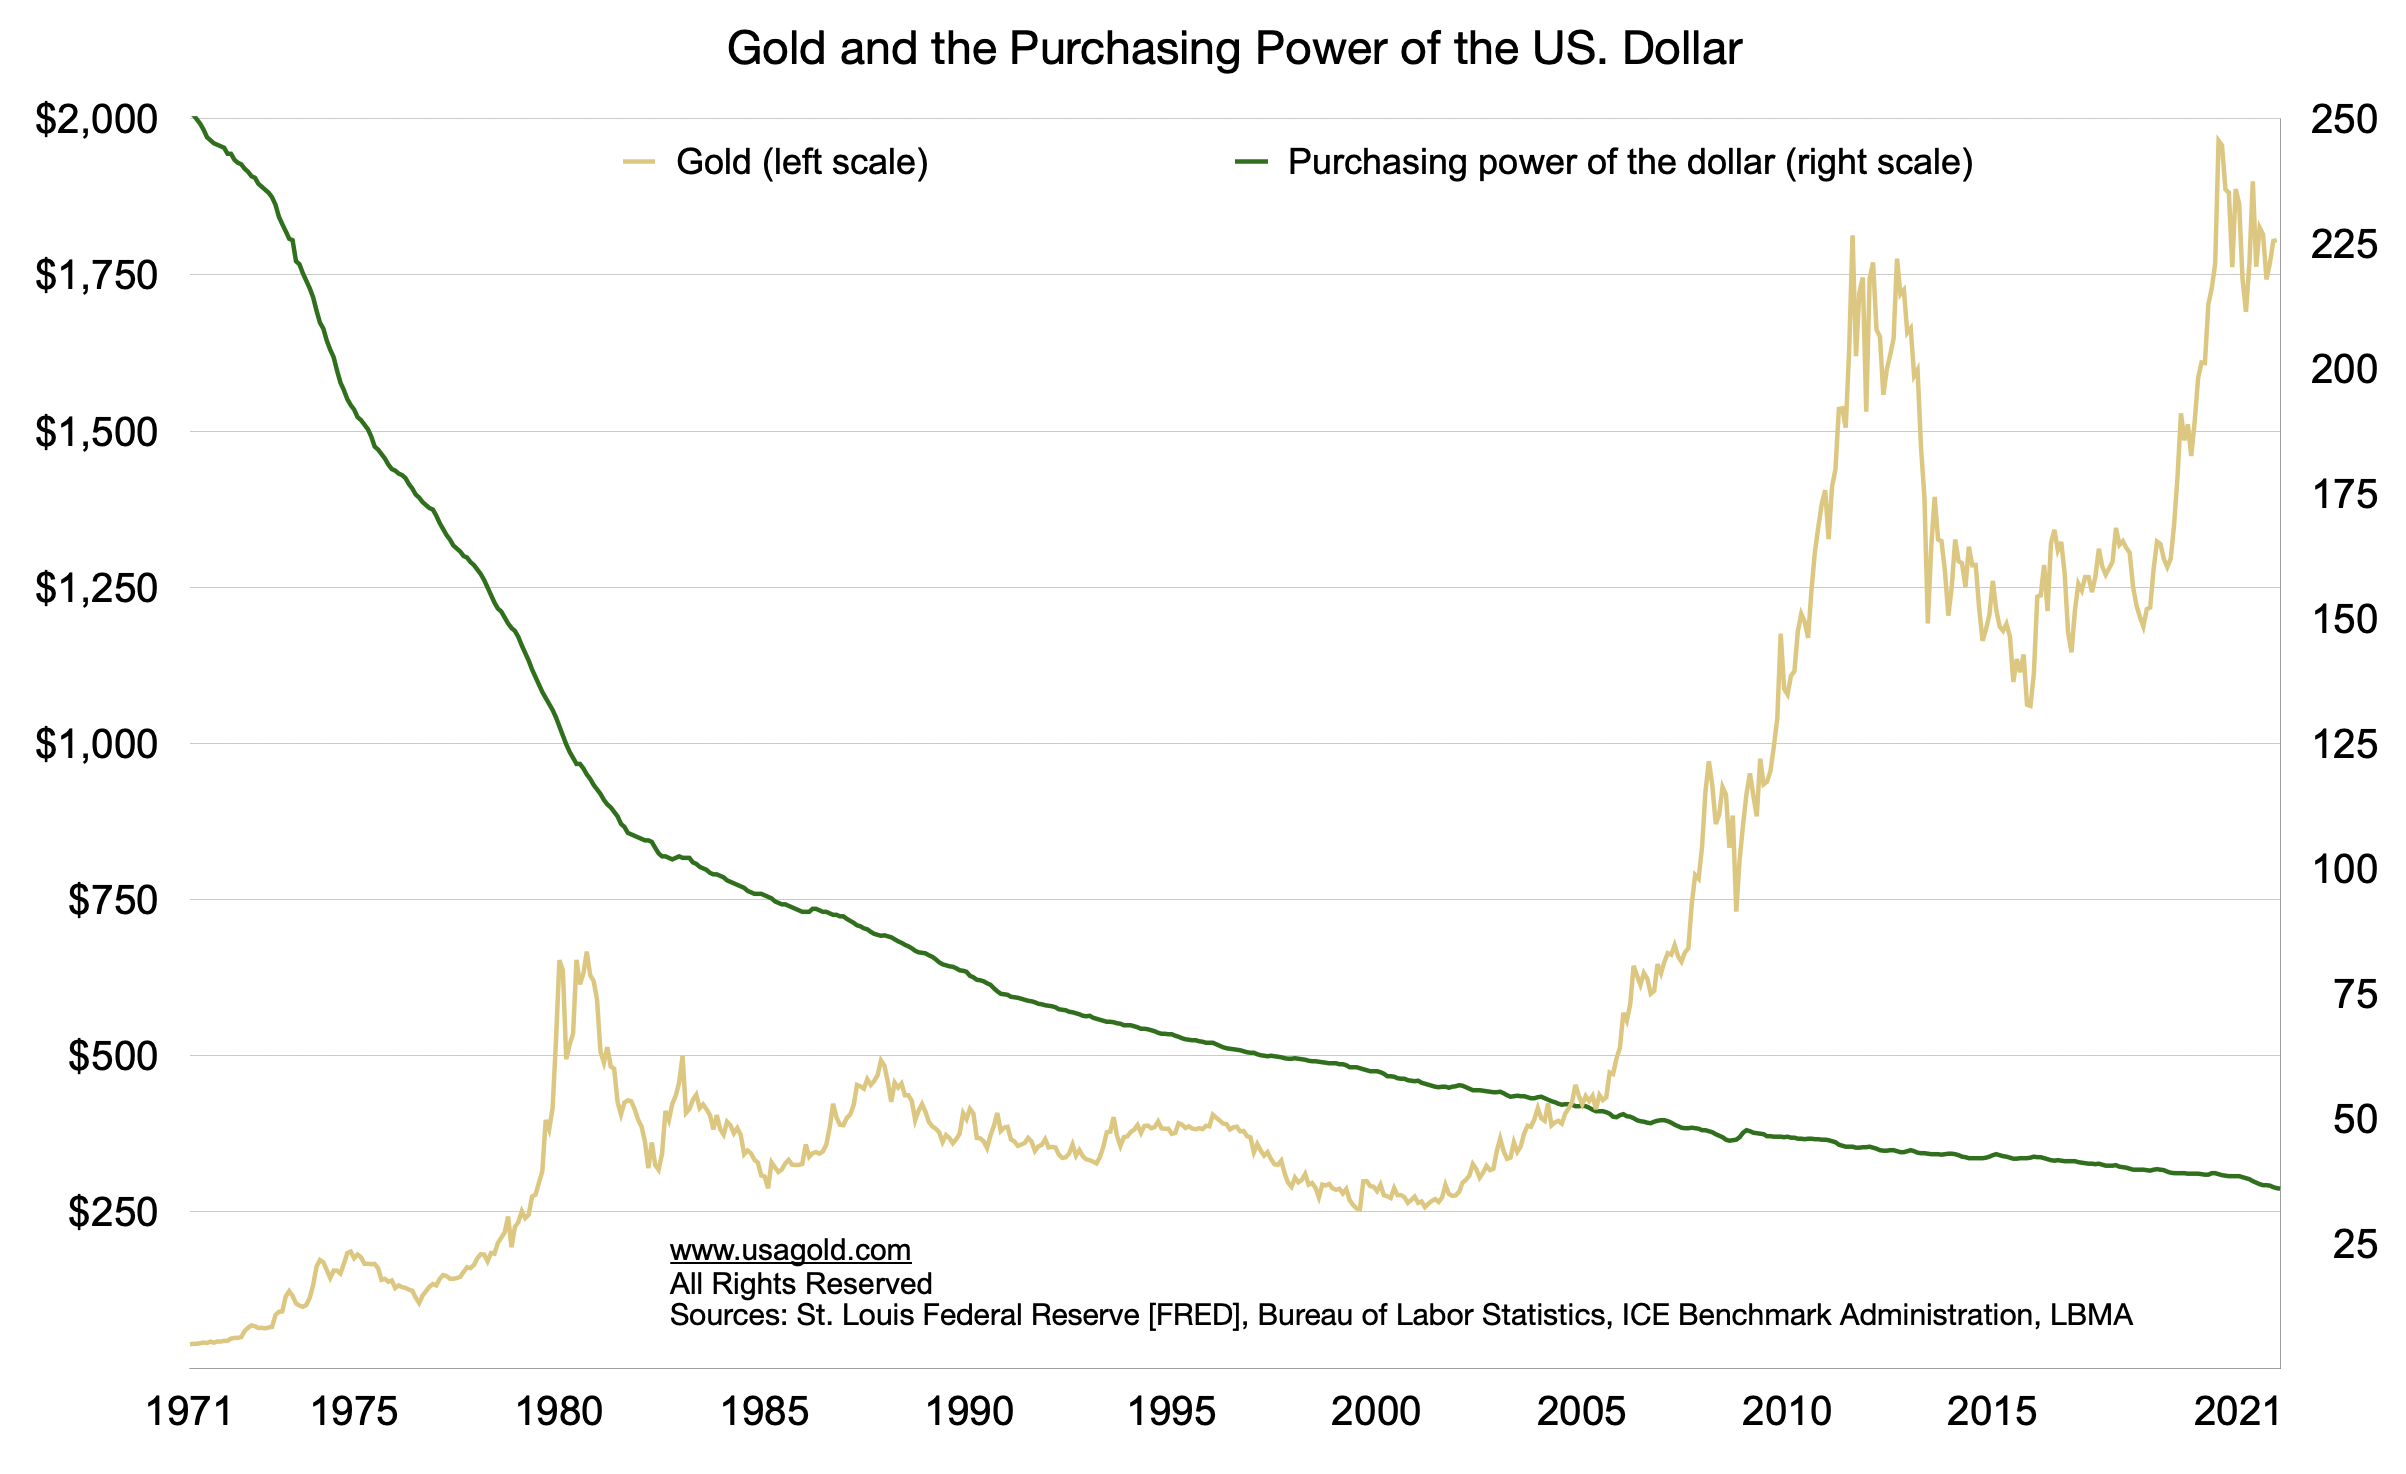 gold and the purchasing power of the dollar 1971-2021